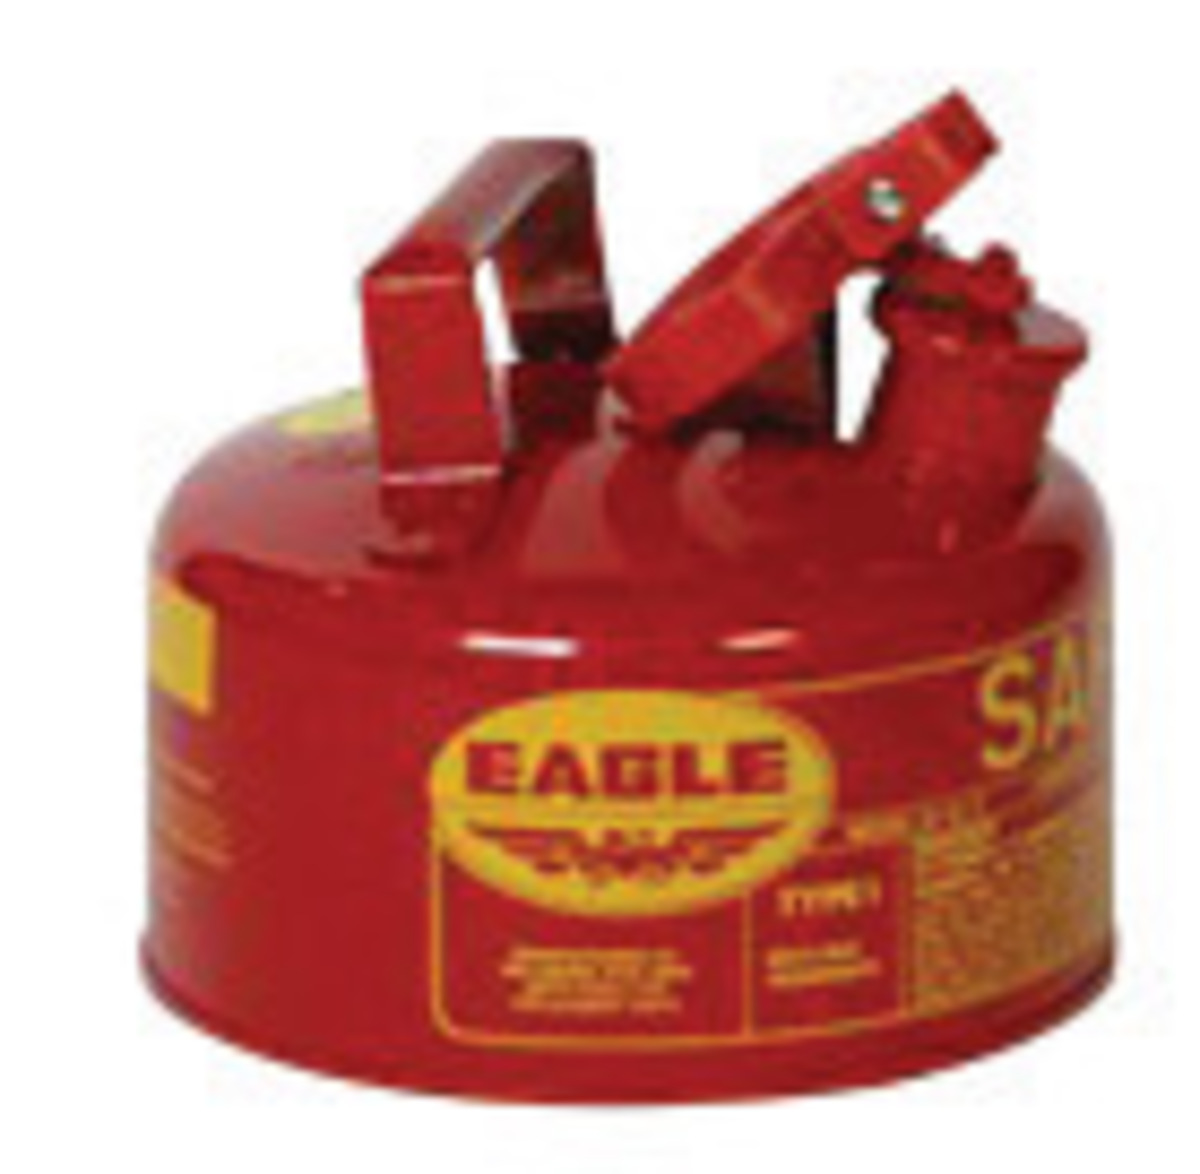 Eagle 1 Gallon Red 24 Gauge Galvanized Steel Type I Safety Can With Non-Sparking Flame Arrestor Without Funnel